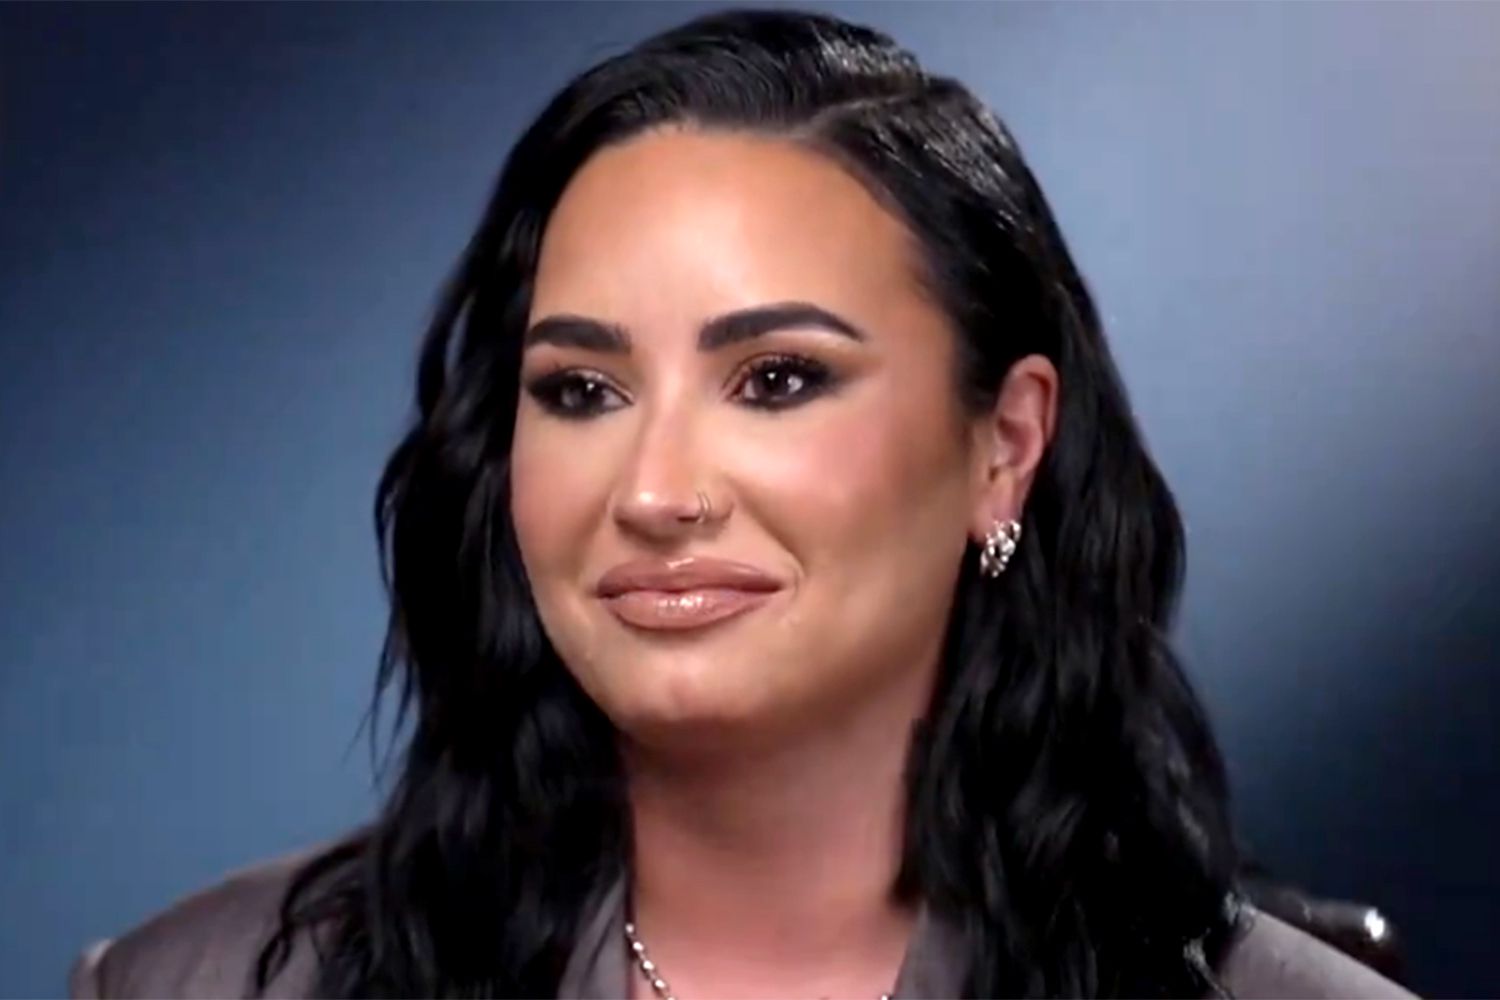 Demi Lovato Says 'Love Is the Great Gift' as She Looks Back on Health Troubles